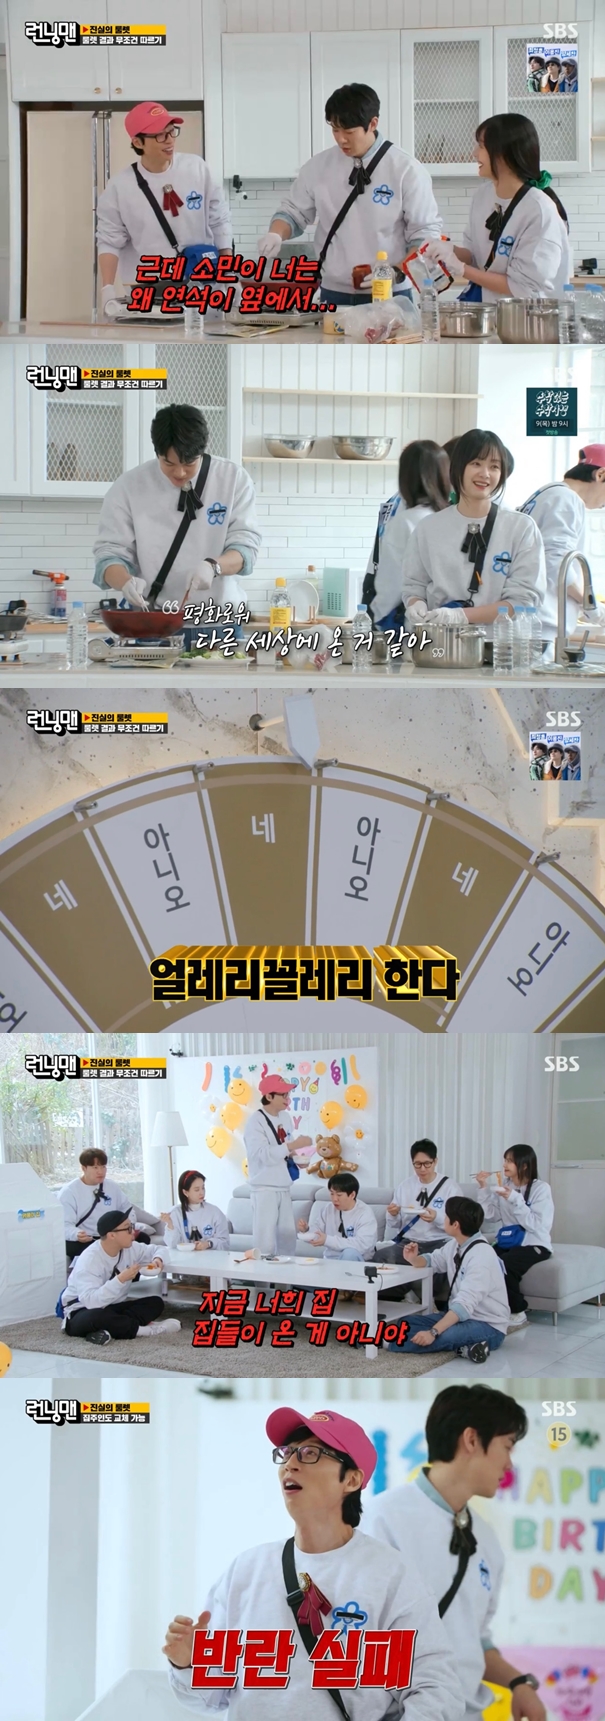 In the SBS entertainment program Running Man broadcasted on the 26th, actors Yoo Yeon-seok and Cha Tae-hyun appeared as guests, and the Butlers Haru race was held to perform the Haru routine set by the landlord.On this day, the members started to make lunches, Rabokki and Kimbap, with ingredients prepared by RCOIN.Yoo Yeon-seok started making rabokki, and Jeon So-min was next to him. Yoo Jae-suk, who saw this, said, But you do not leave the curb next to you. Jeon So-min made Yoo Yeon-seok laugh by saying, I feel comfortable cooking next to Yoo Yeon-seok. Its peaceful. I feel like Im in a different world.Cha Tae-hyun, who watched this from afar, wrote a question on roulette, Do you have a butler and a butler today?When I turned the roulette, I said Yes and Jeon So-min turned around and started making fun of the red-faced Jeon So-min.Kimbap and Rabokki were all finished, and the members started to eat delicious. Ji Suk-jin praised Why are you so good at curbing? Yoo Yeon-seok said, Its delicious.He helped me a lot, Jeon So-mins mood rose.Yoo Jae-Suk told Jeon So-min, Your houses are not here now.In particular, Yoo Jae-Suk turned roulette to change the landlord, but he failed and fell from chief butler to flat butler.Afterwards, the members began to listen to the story, discuss it, and decide not to sell it. First, the first story was Should I sell my husbands game addiction?The storyteller, who said she was a new wife, said her husbands best friend gave her a play STeation, saying it was a must-have item for newlyweds. She also complained that her husband called her friends and played a game with them, calling it stressful.In the story, Yoo Jae-suk said, Those who have played the game know that it takes a lot of time. There are too many Game to nurture, and soccer is played on the Internet through Daejeon.Then Kim Jong Kook and Ji Suk-jin were suspicious of the story, Are you sorry? And Is not this your story?Yoo Jae-Suk said, When I buy this, I tell Na Kyung Eun, I live with JiHo. He said, I have been with JiHo a few times.JiHo prefers computer mobile Game, he laughed.Photo = SBS Broadcast screen